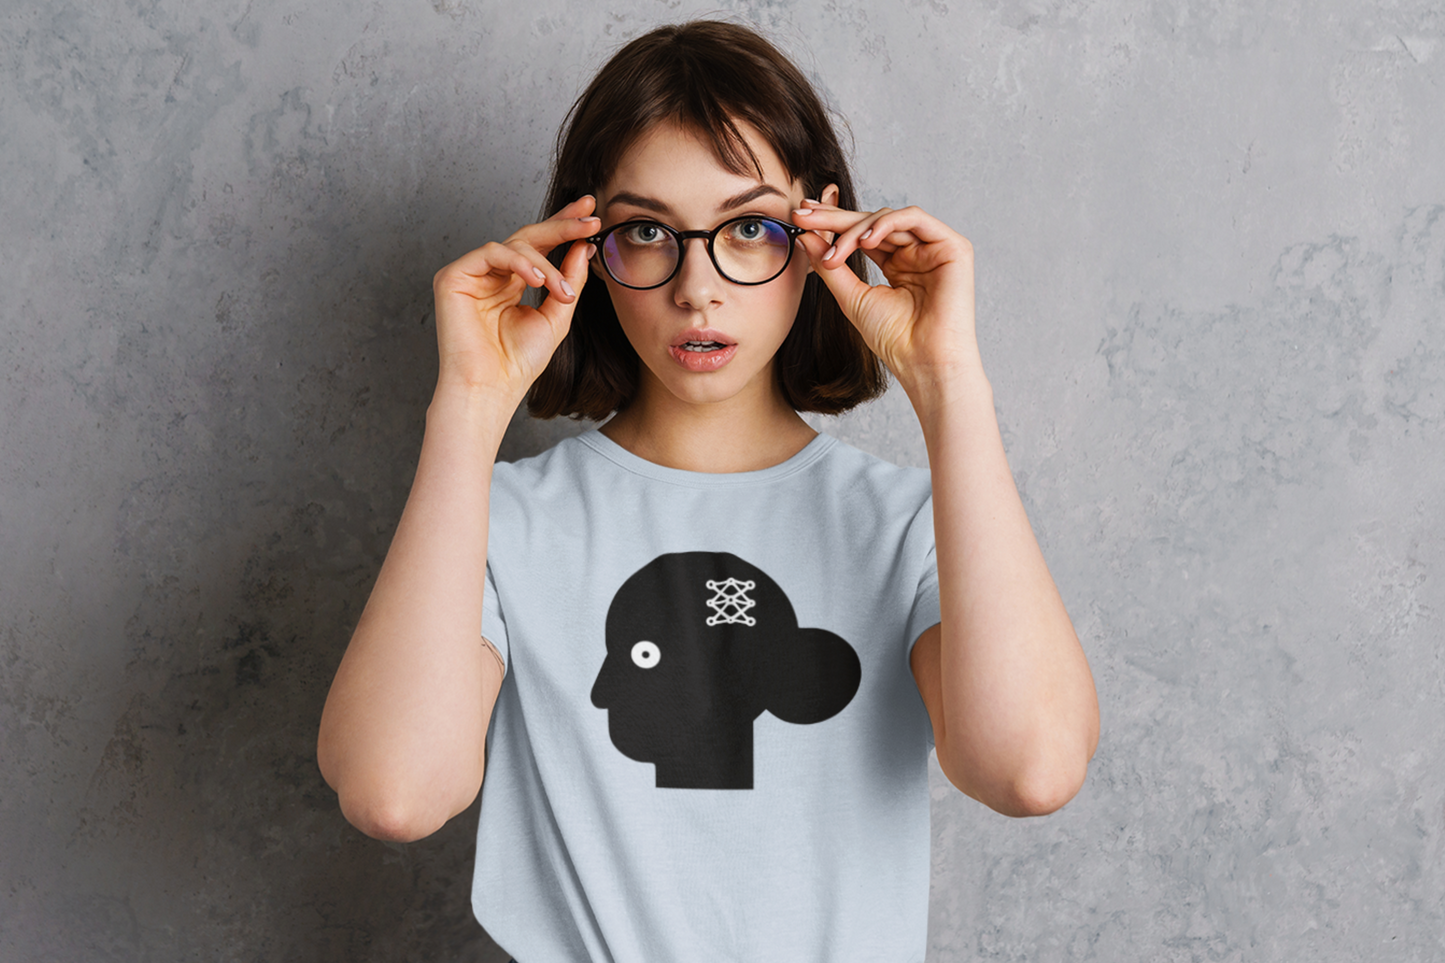 woman with neural network on shirt expressing love